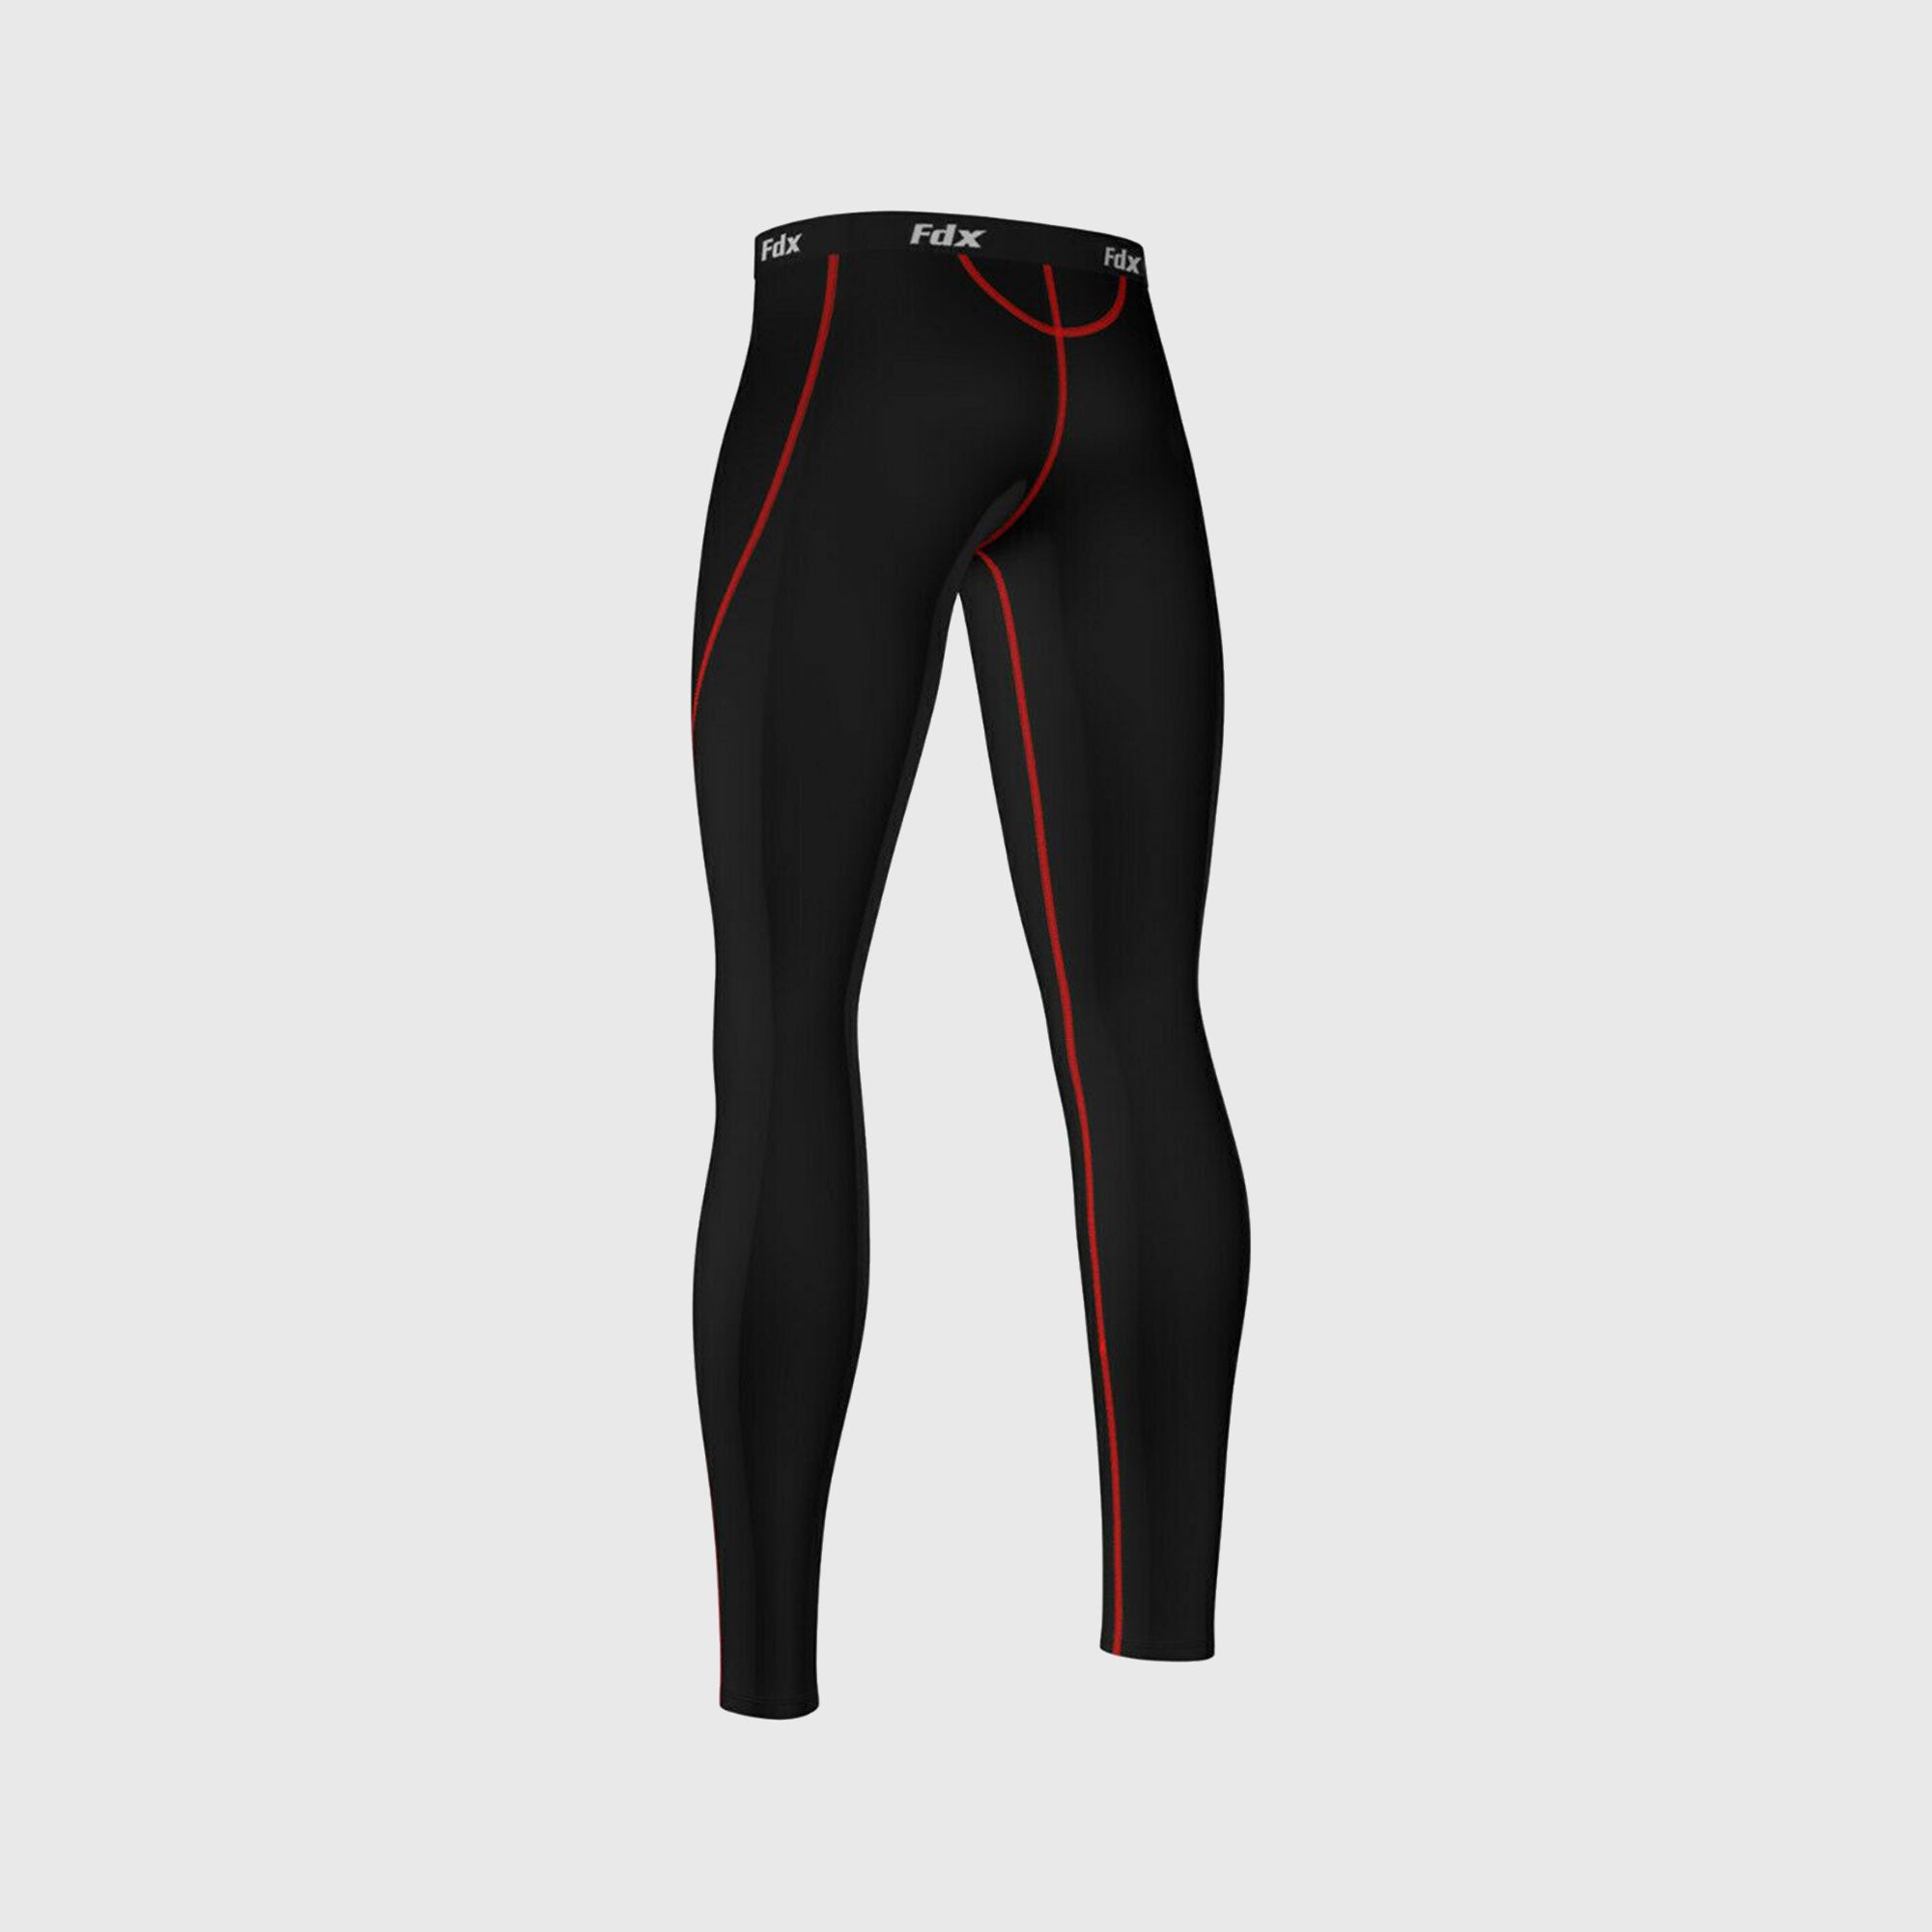 Fdx Thermolinx Men's Thermal Winter Compression Tights Red & Blue